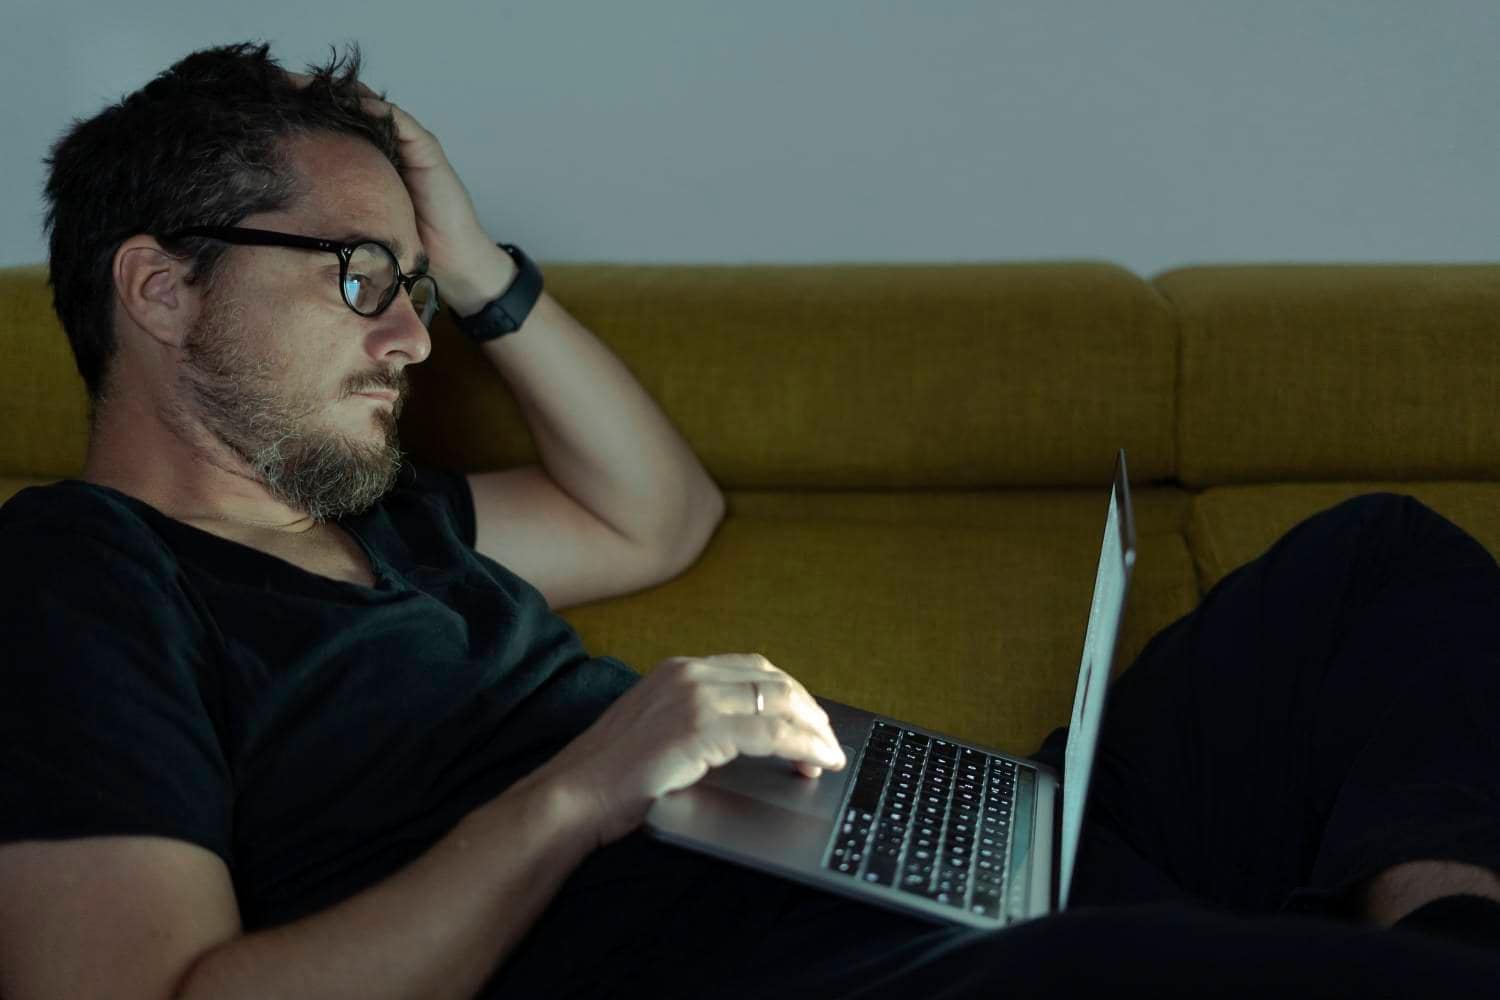 Man working on laptop late at night on couch